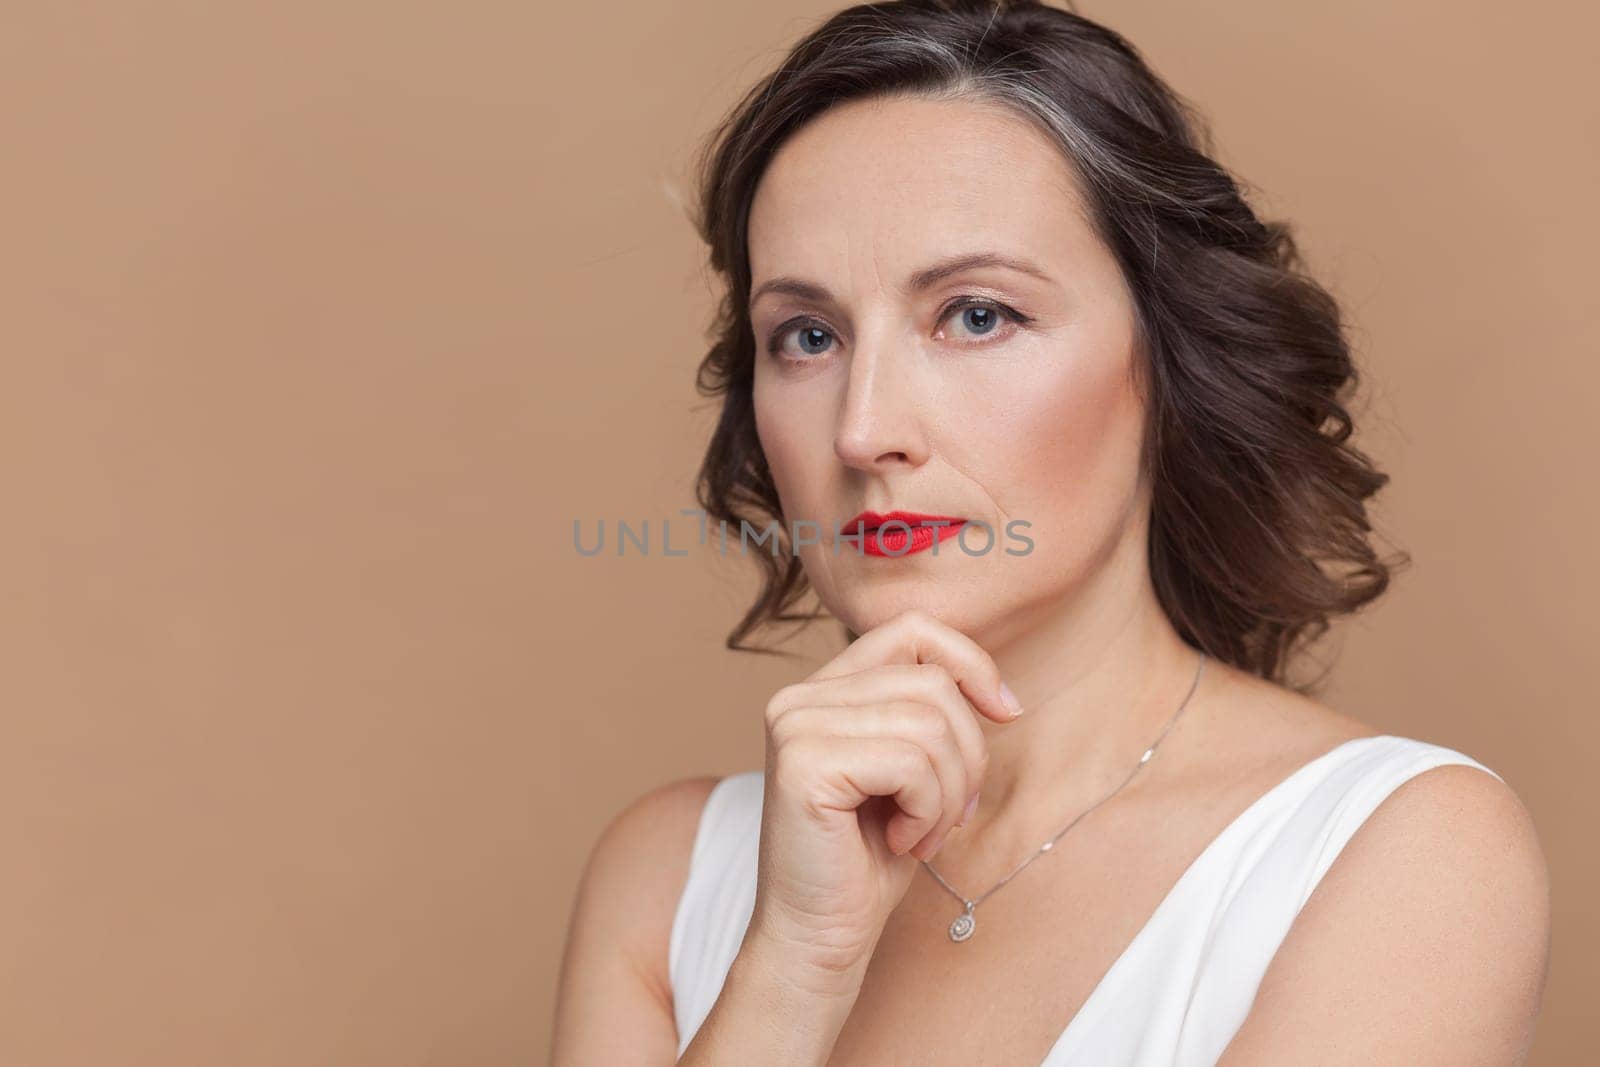 Closeup of serious pensive attractive beautiful middle aged woman with wavy hair and makeup, looking at camera, holding chin, wearing white dress. Indoor studio shot isolated on light brown background